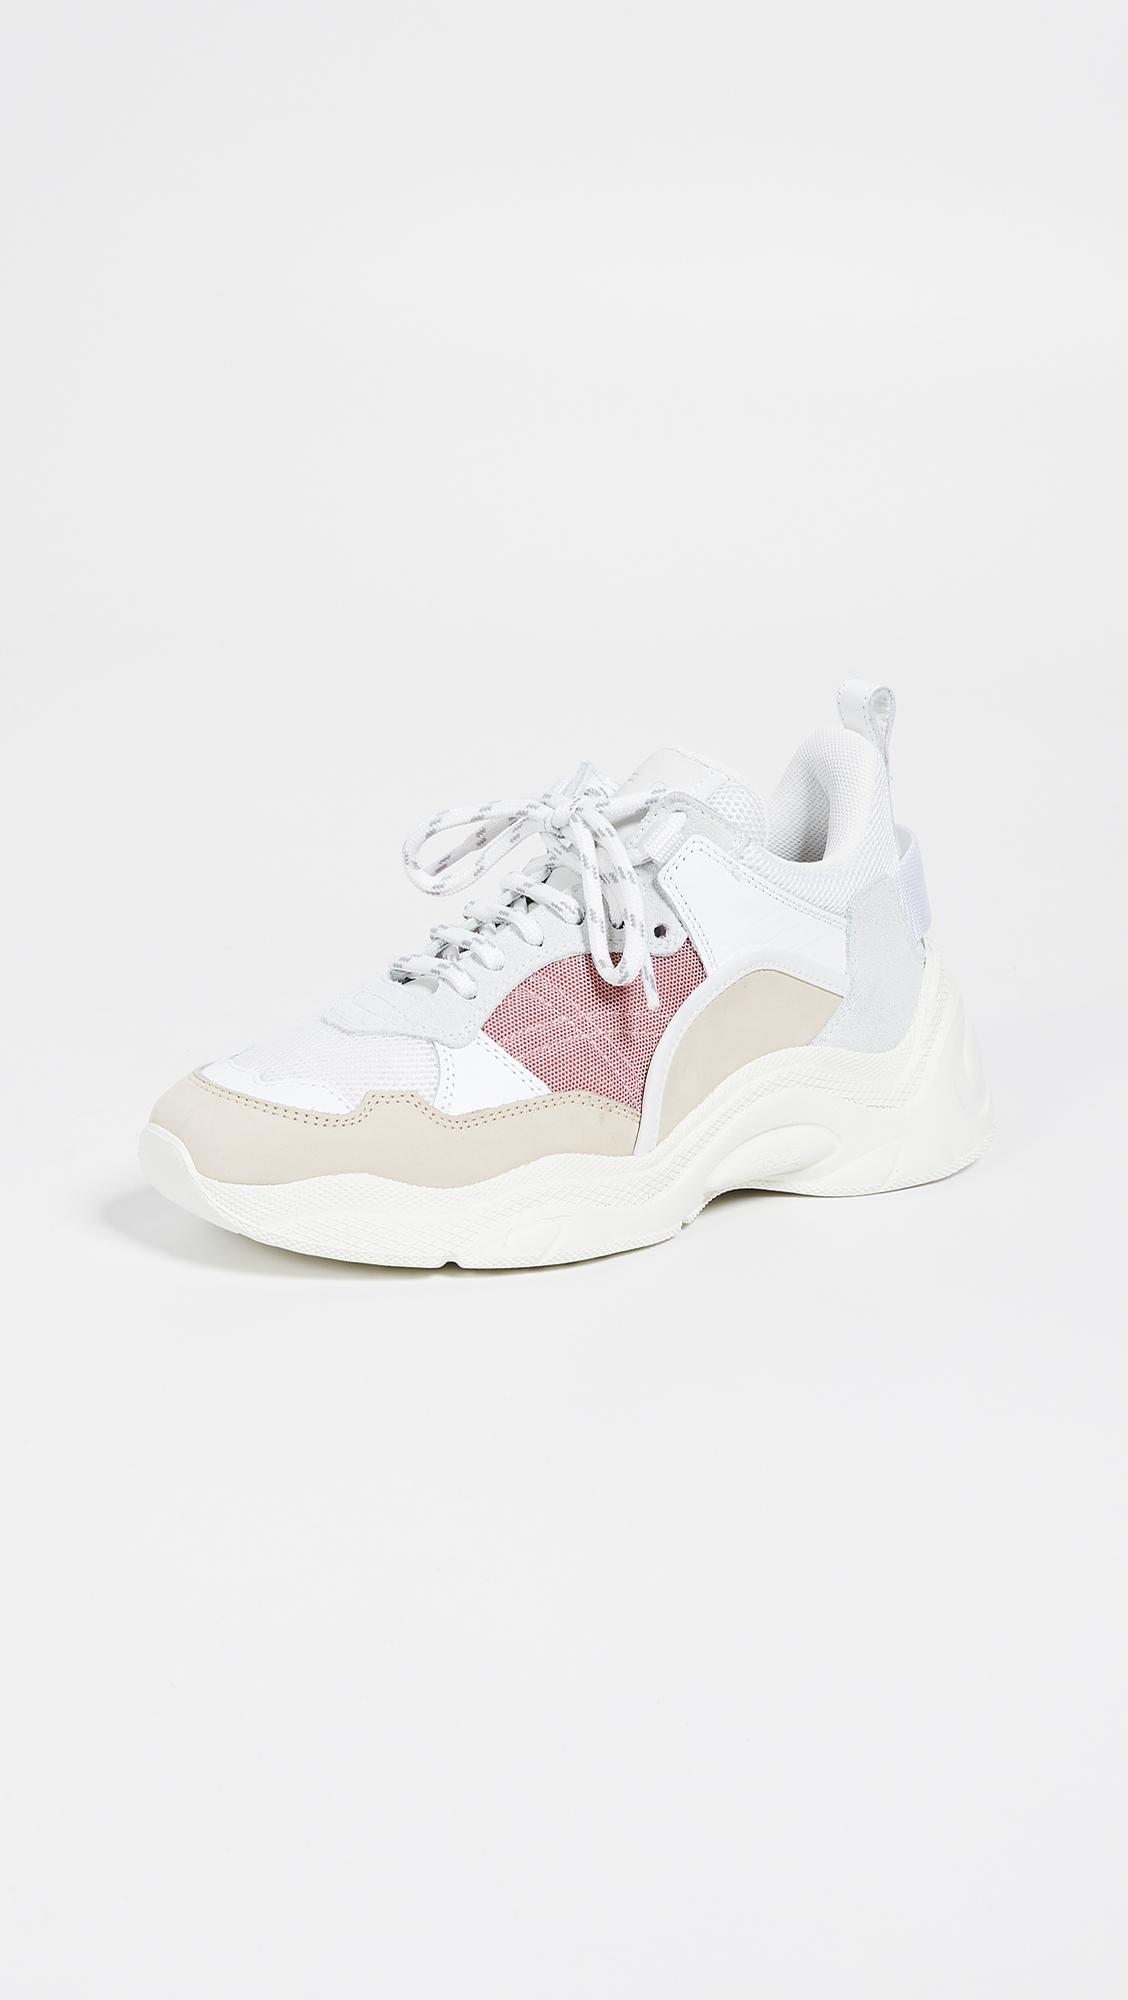 IRO Leather Curverunner Sneakers in Pink - Lyst